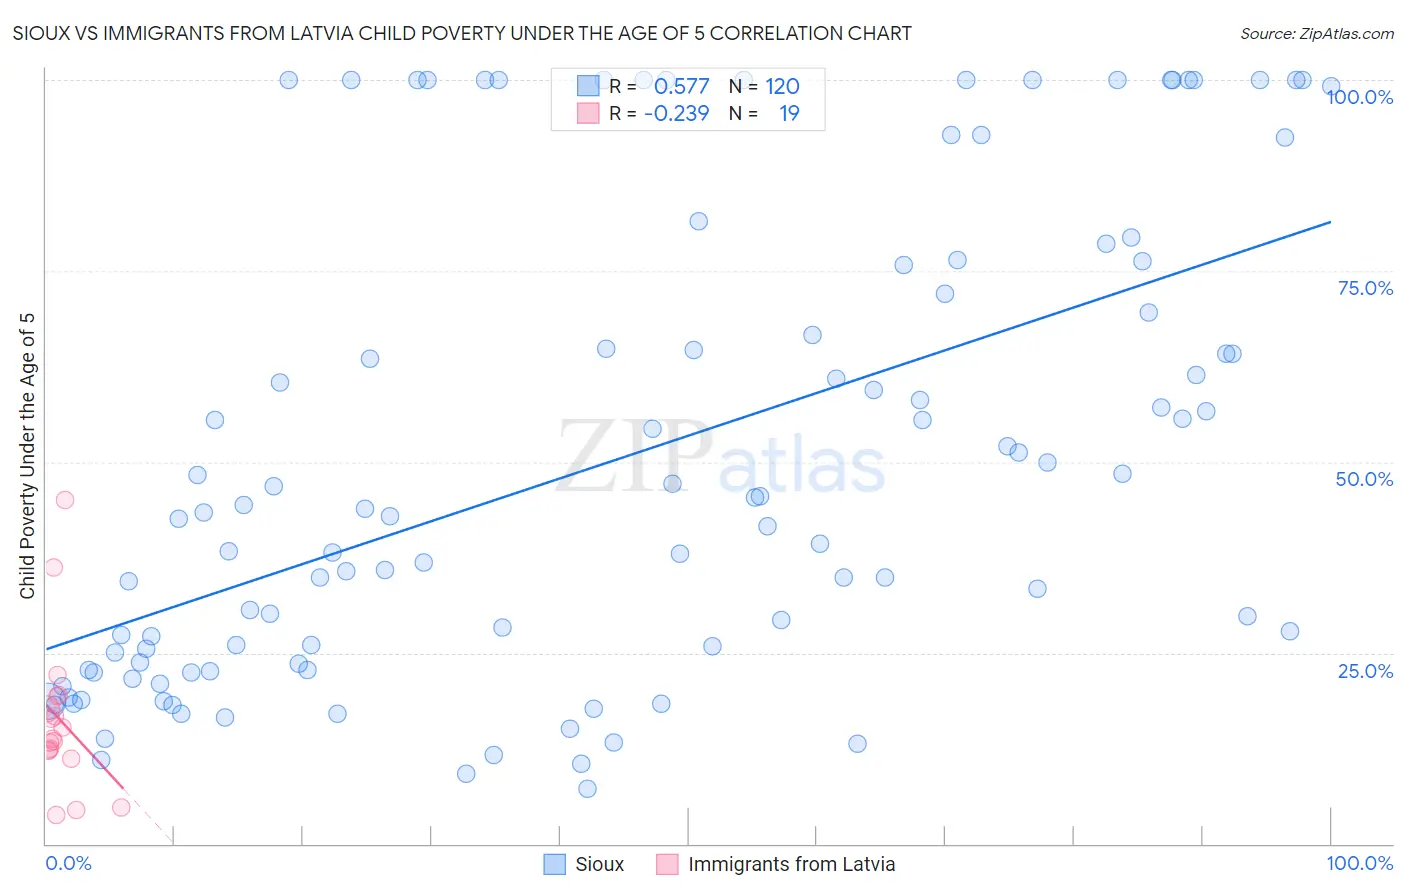 Sioux vs Immigrants from Latvia Child Poverty Under the Age of 5